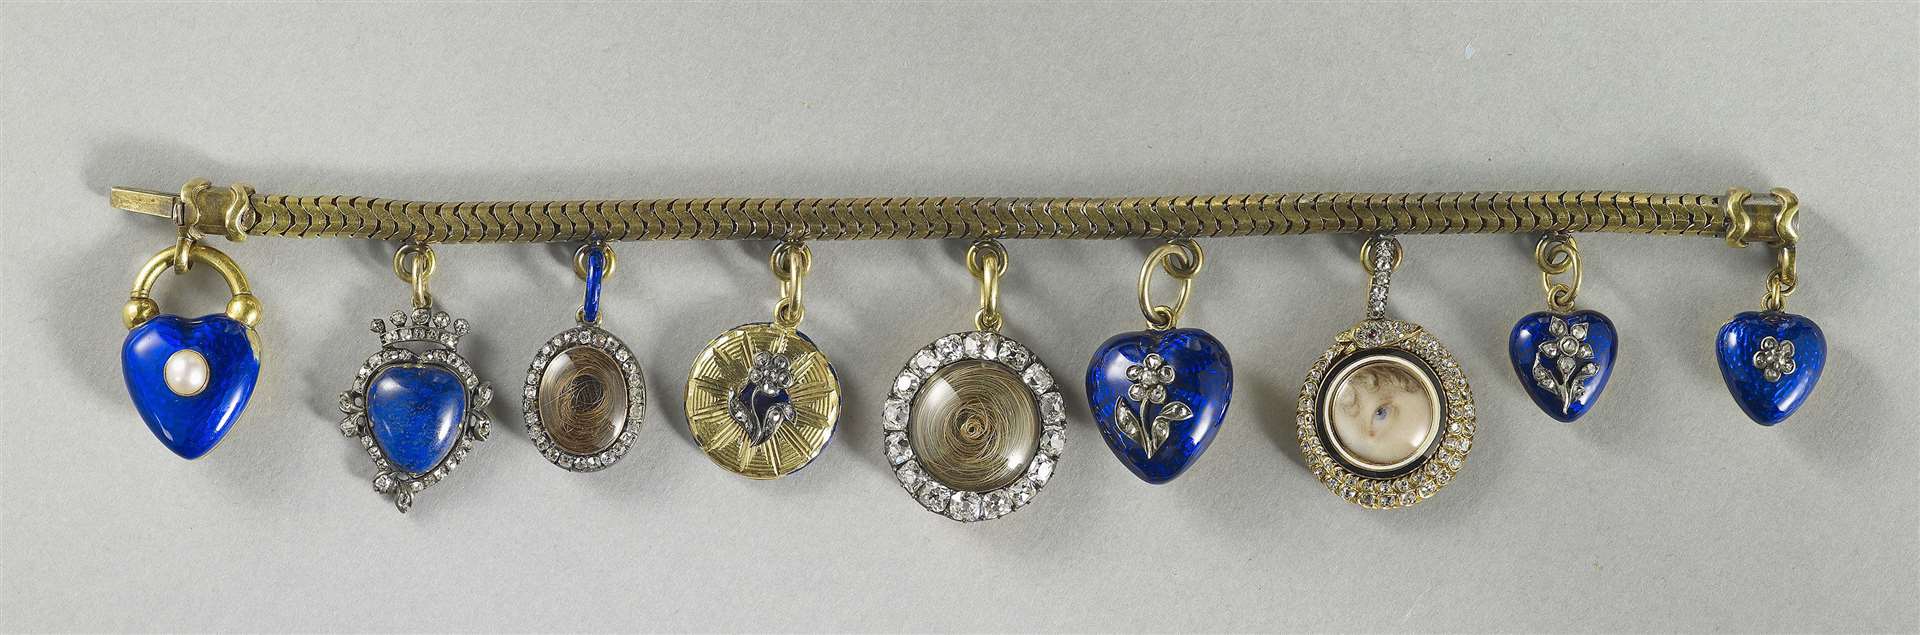 Bracelet with nine lockets, one with a miniature of Princess Charlotte’s left eye (Royal Collection Trust/HM King Charles III/PA)